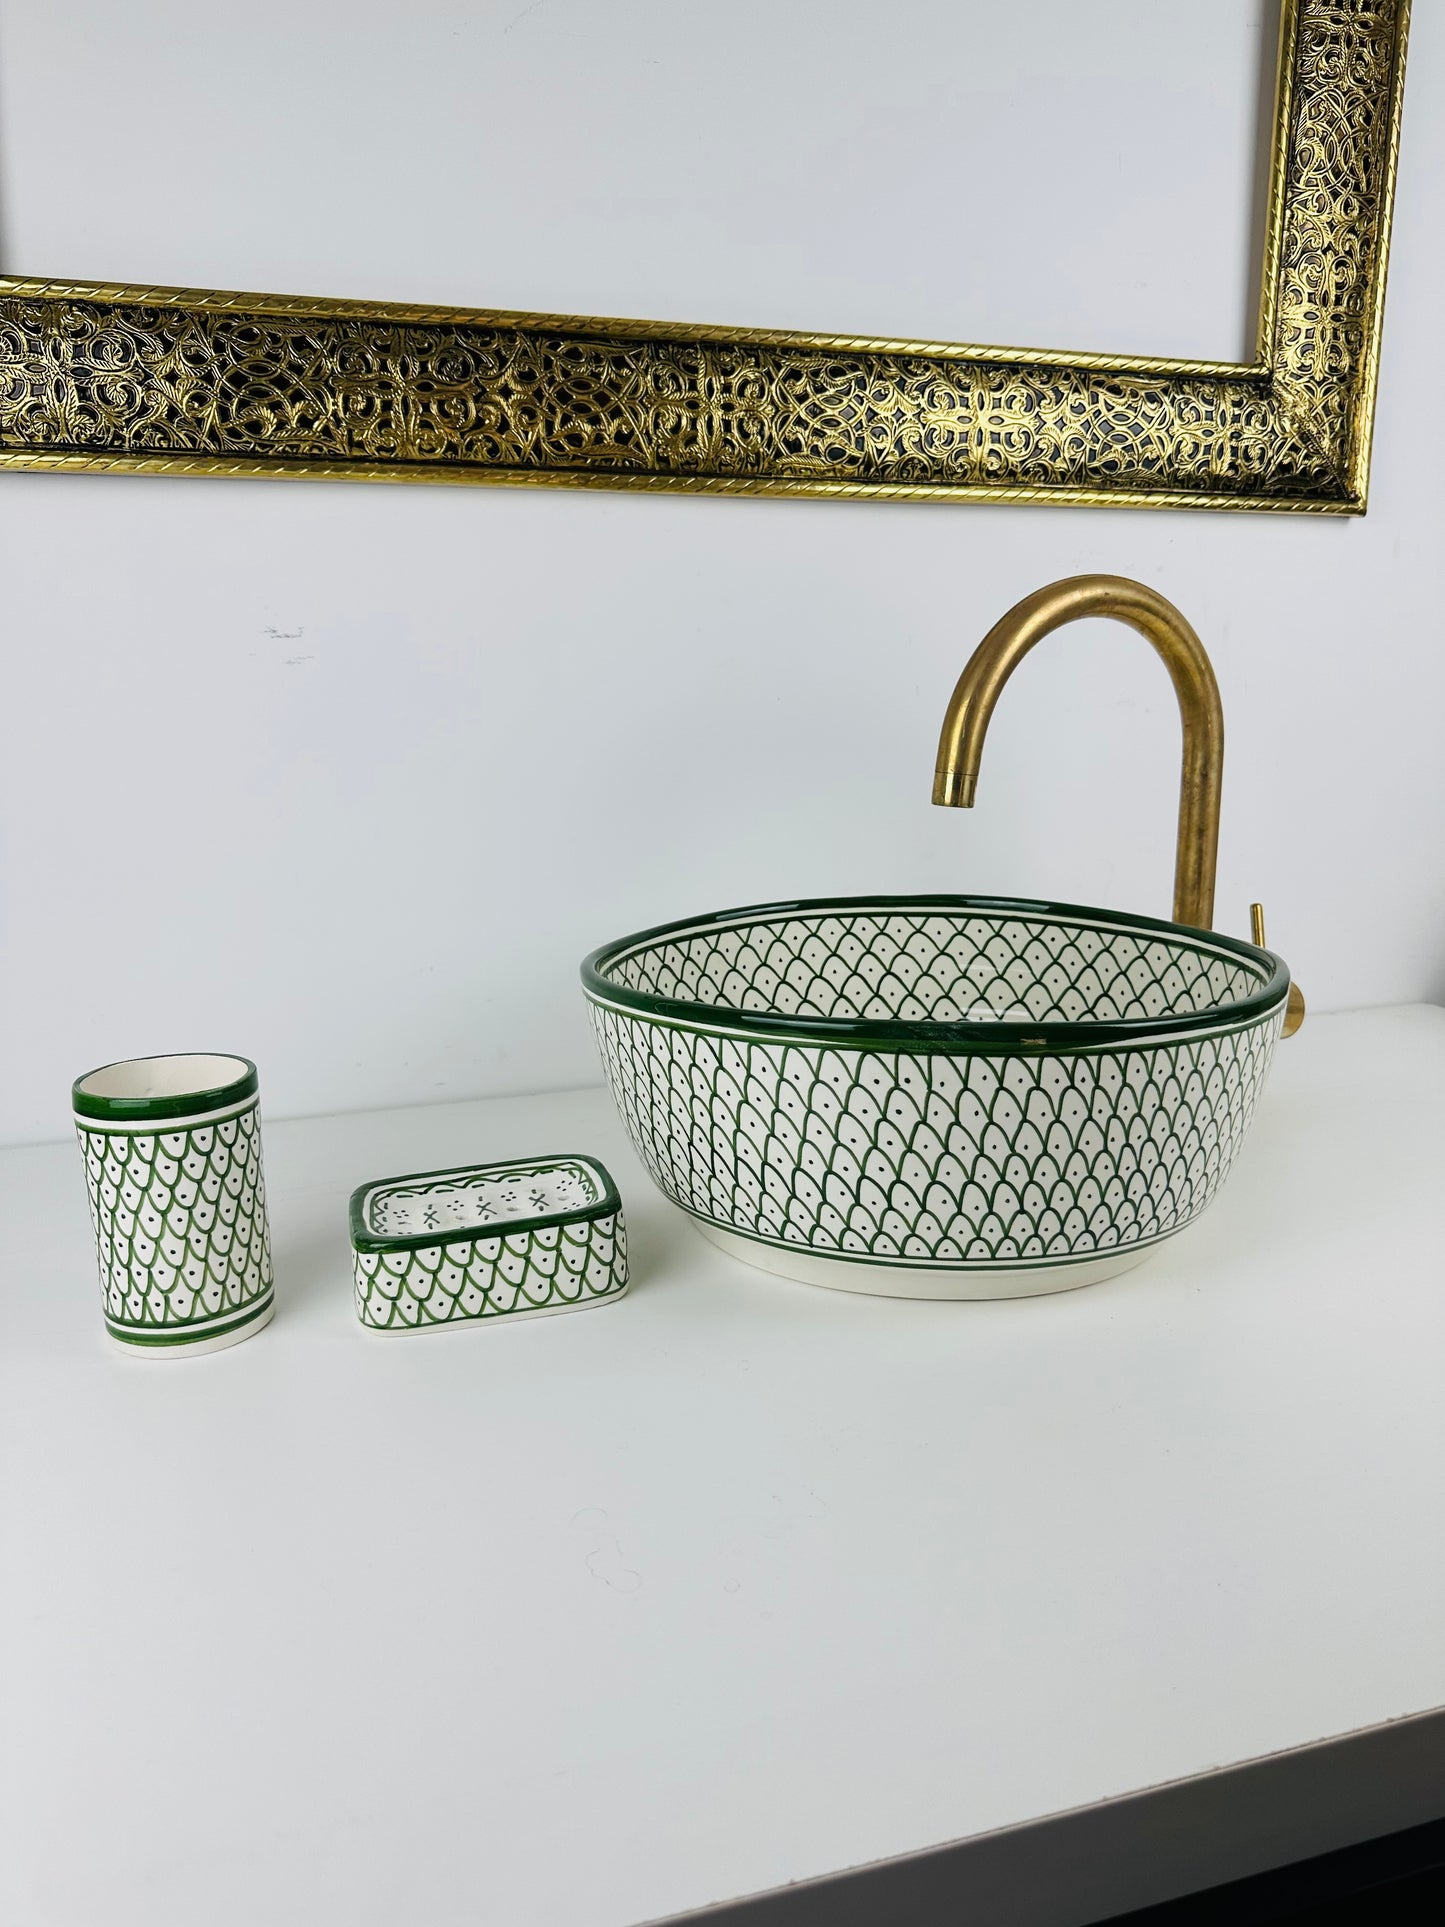 Green Enchantment: Hand-Painted Emerald Green Ceramic Sink with Artistic Flair